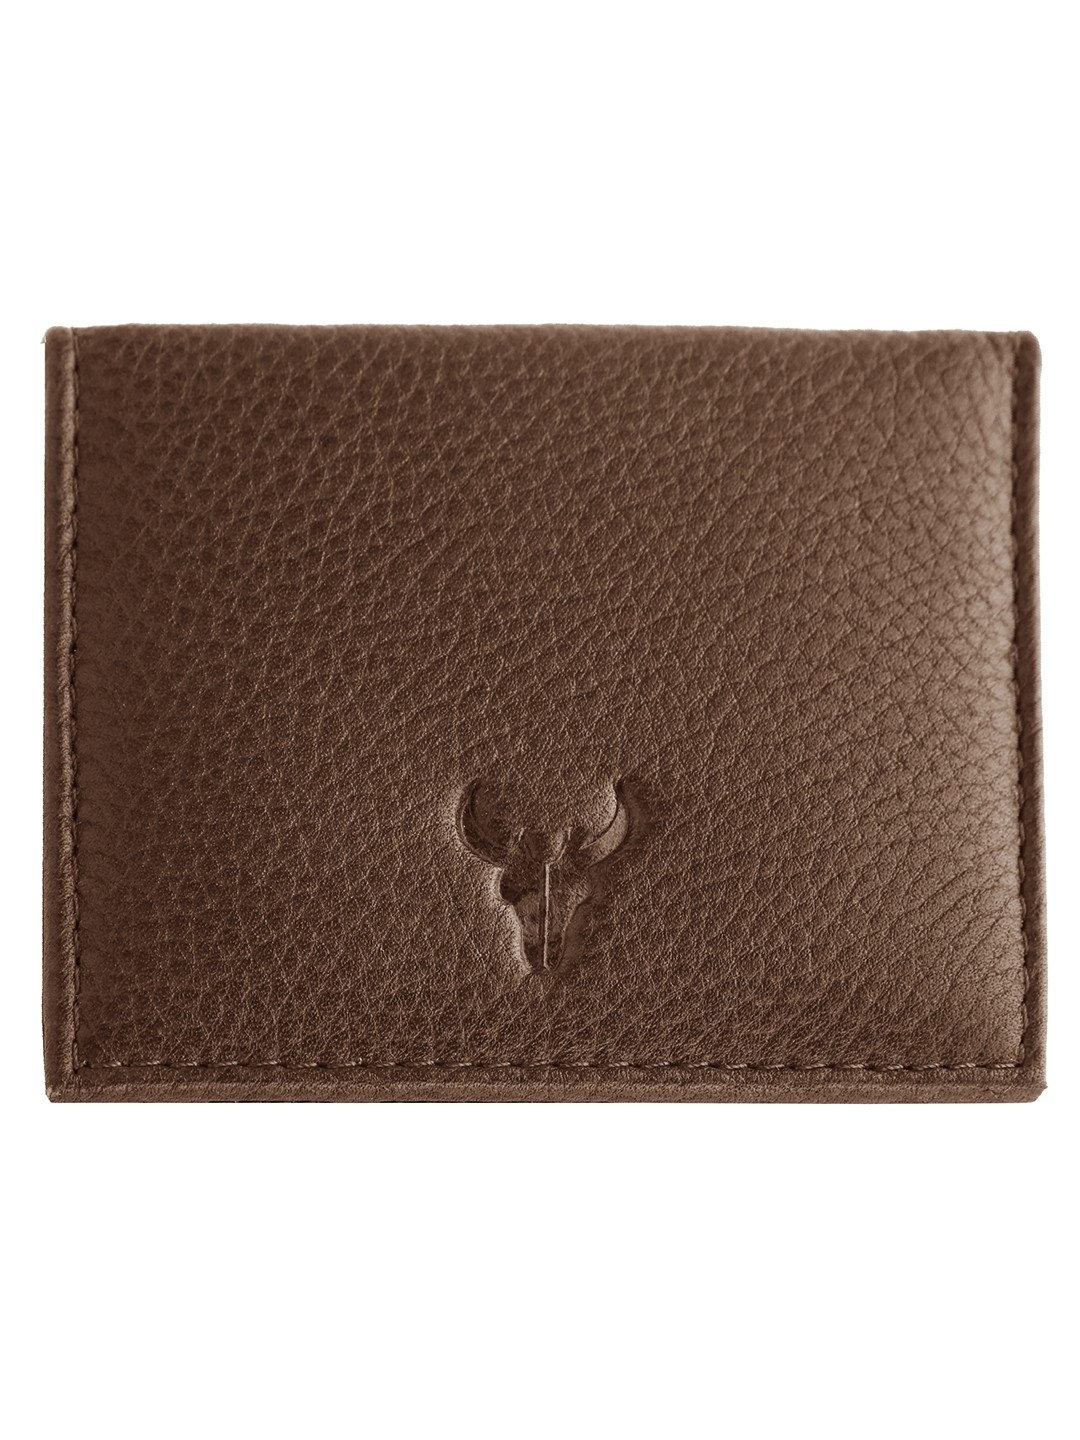 Napa Hide | Napa Hide RFID Protected Genuine High Quality Leather Brown Wallet for Men